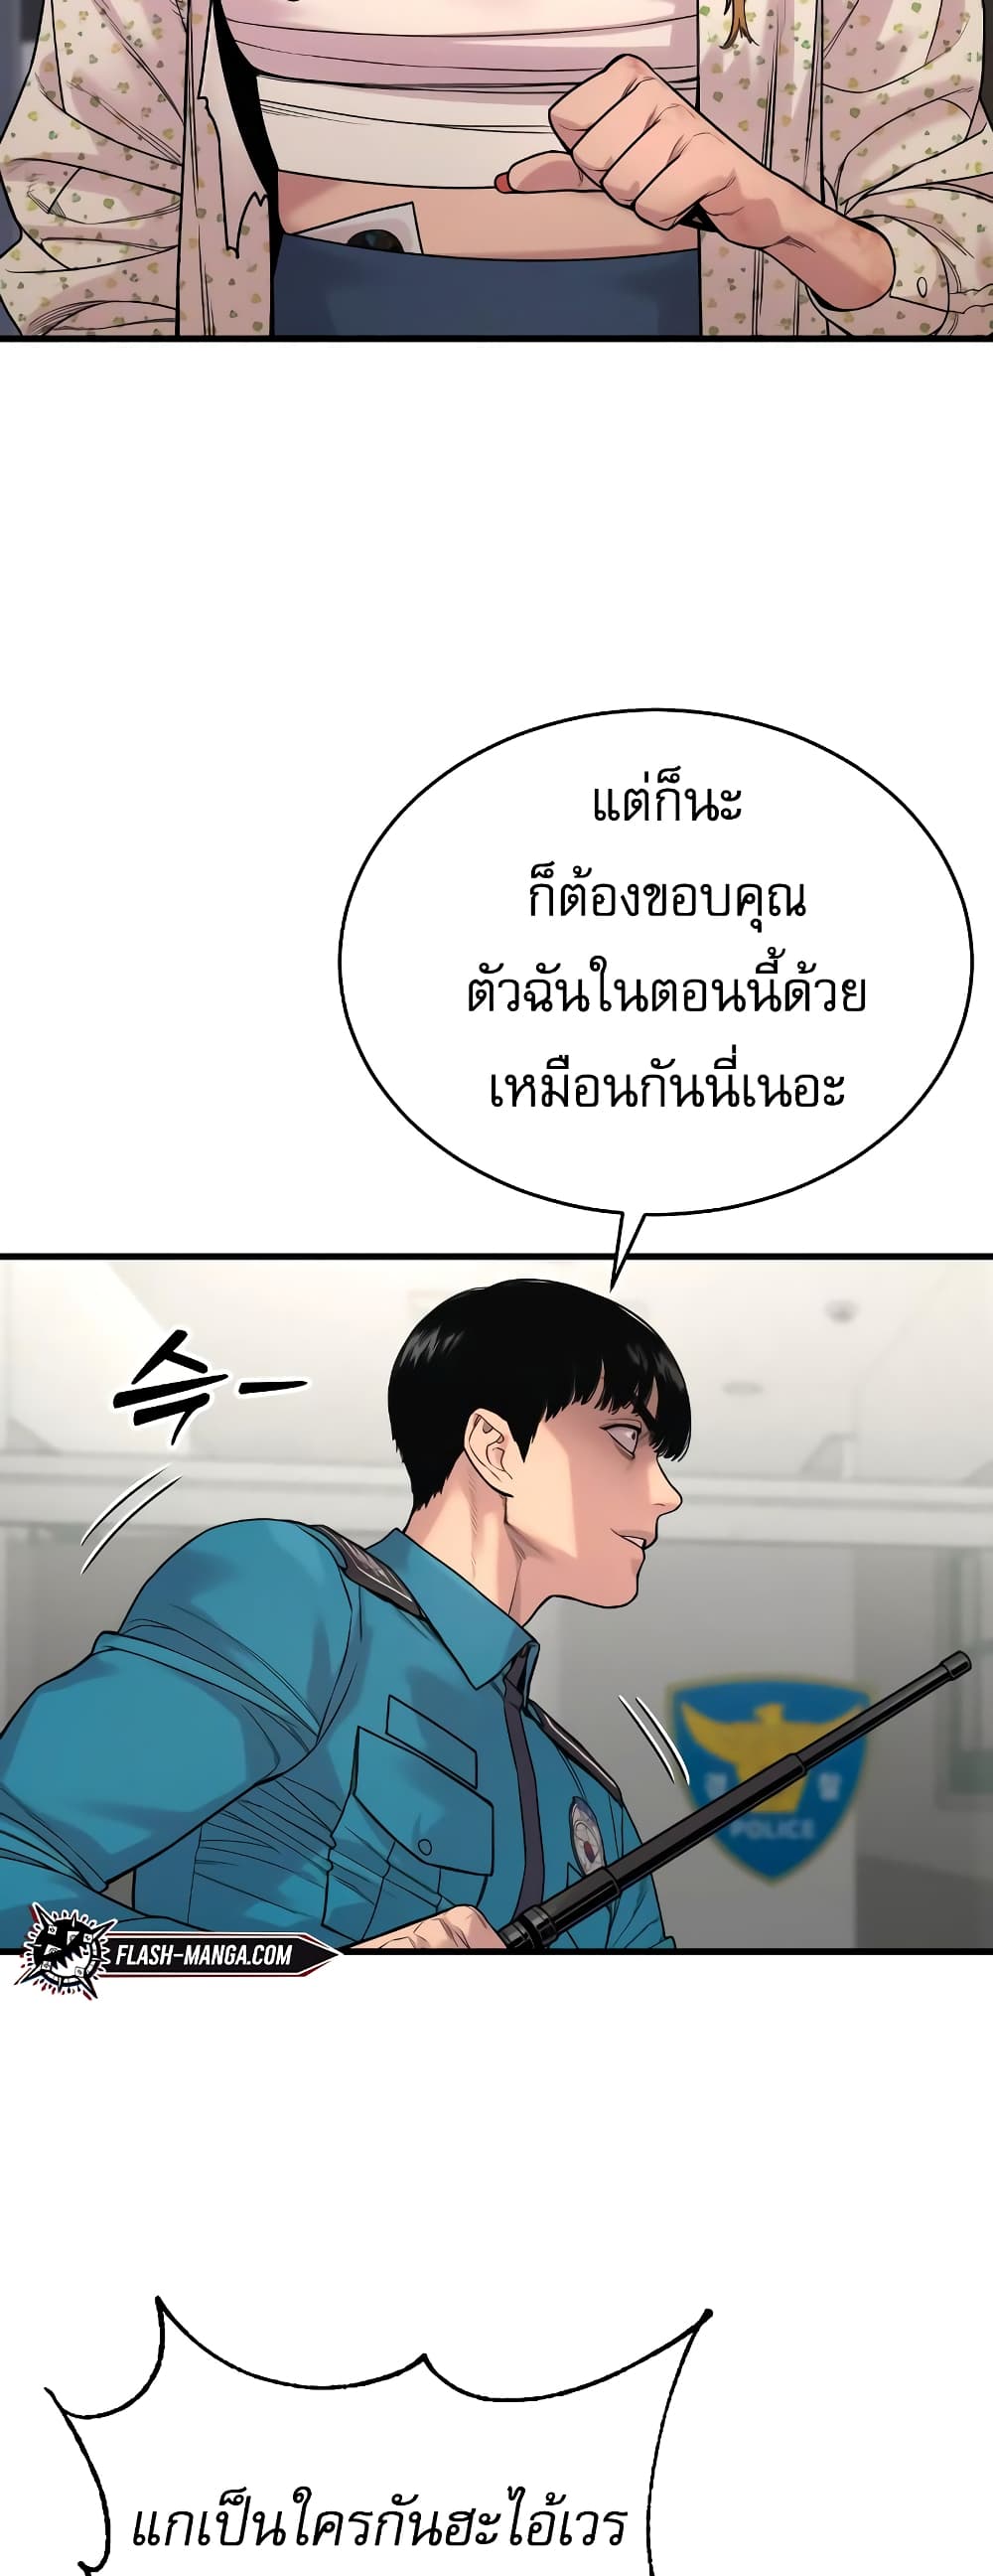 Return of the Bloodthirsty Police ตอนที่ 8 (38)